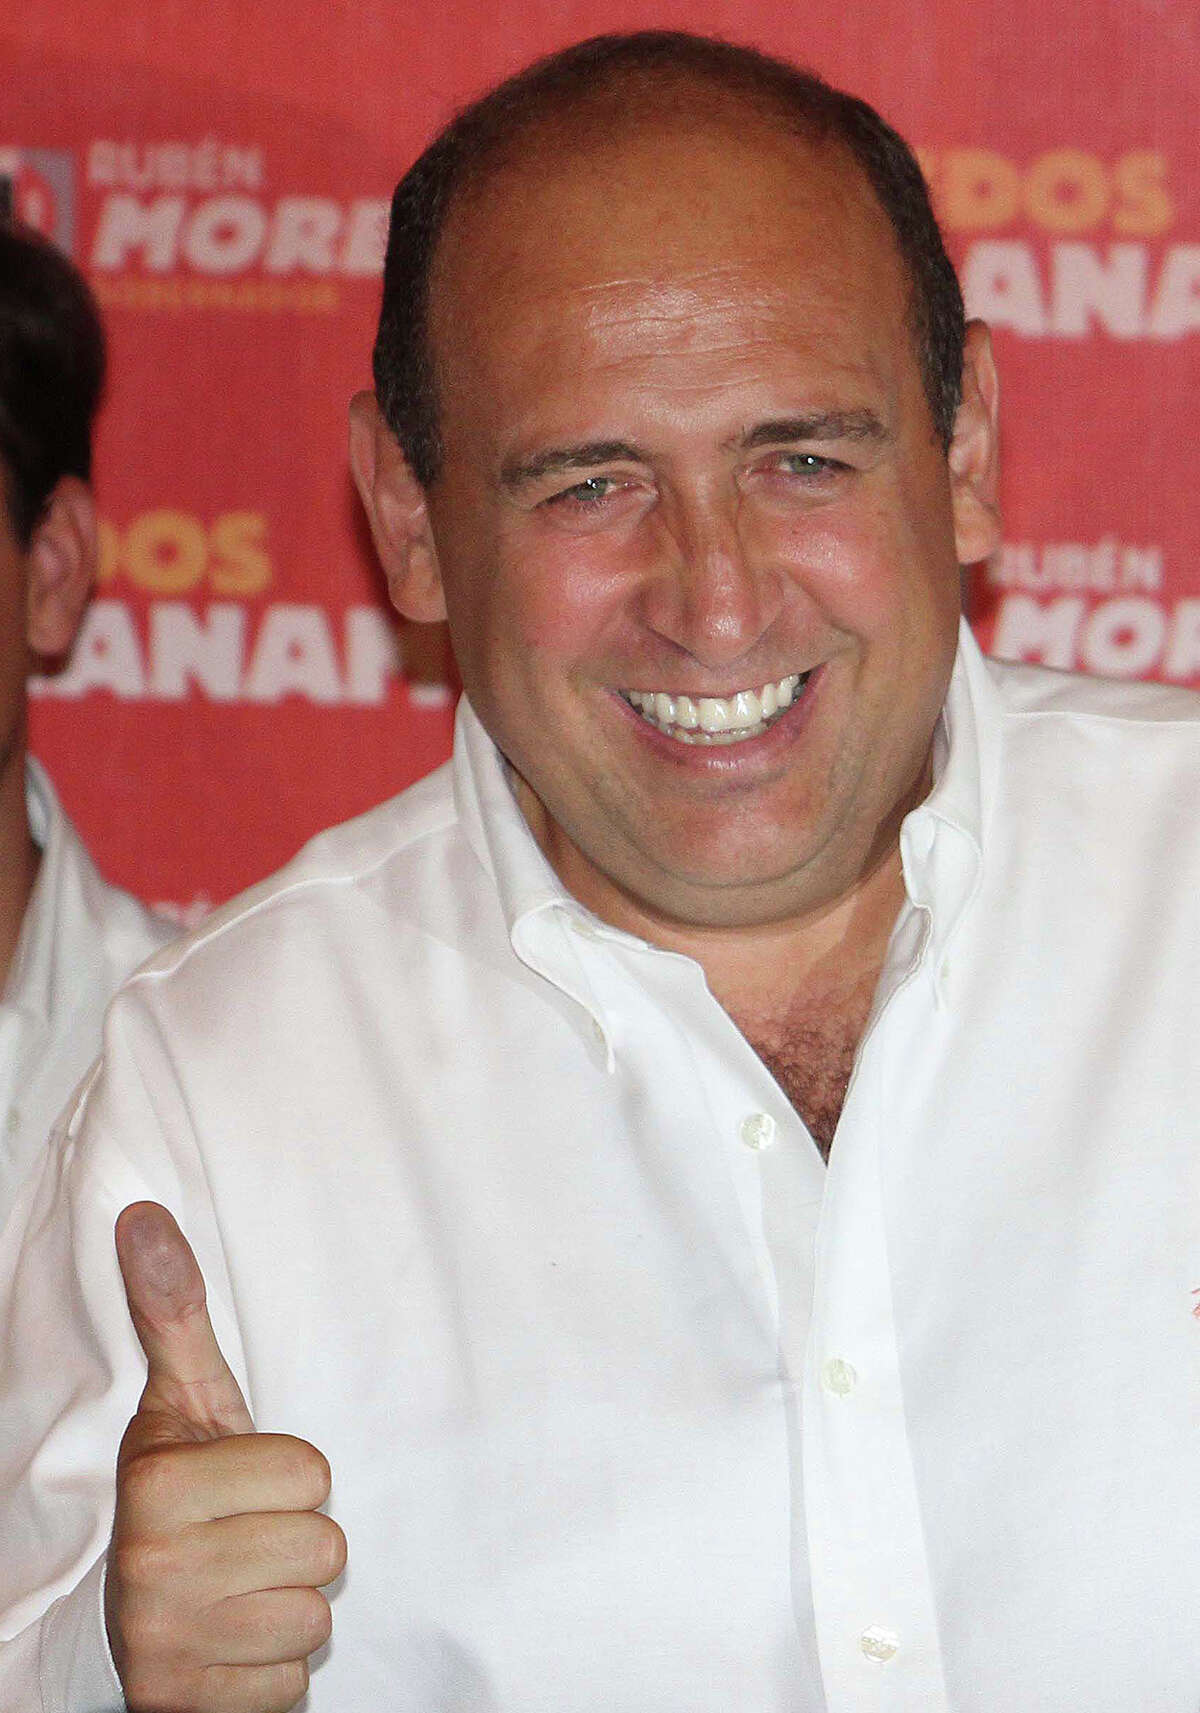 Ruben Moreira, the Institutional Revolutionary Party's (PRI) candidate for governor of the state of Coahuila, flashed a thumbs-up as he celebrated his electoral victory in Torreon, Mexico in 2011. A witness at the San Antonio federal trial of an accused leader of the Zetas drug trafficking cartel said the Zetas gave Moreira a “campaign contribution” that year — cash-packed suitcases in a Chevy Suburban. (AP Photo/Alberto Puente)